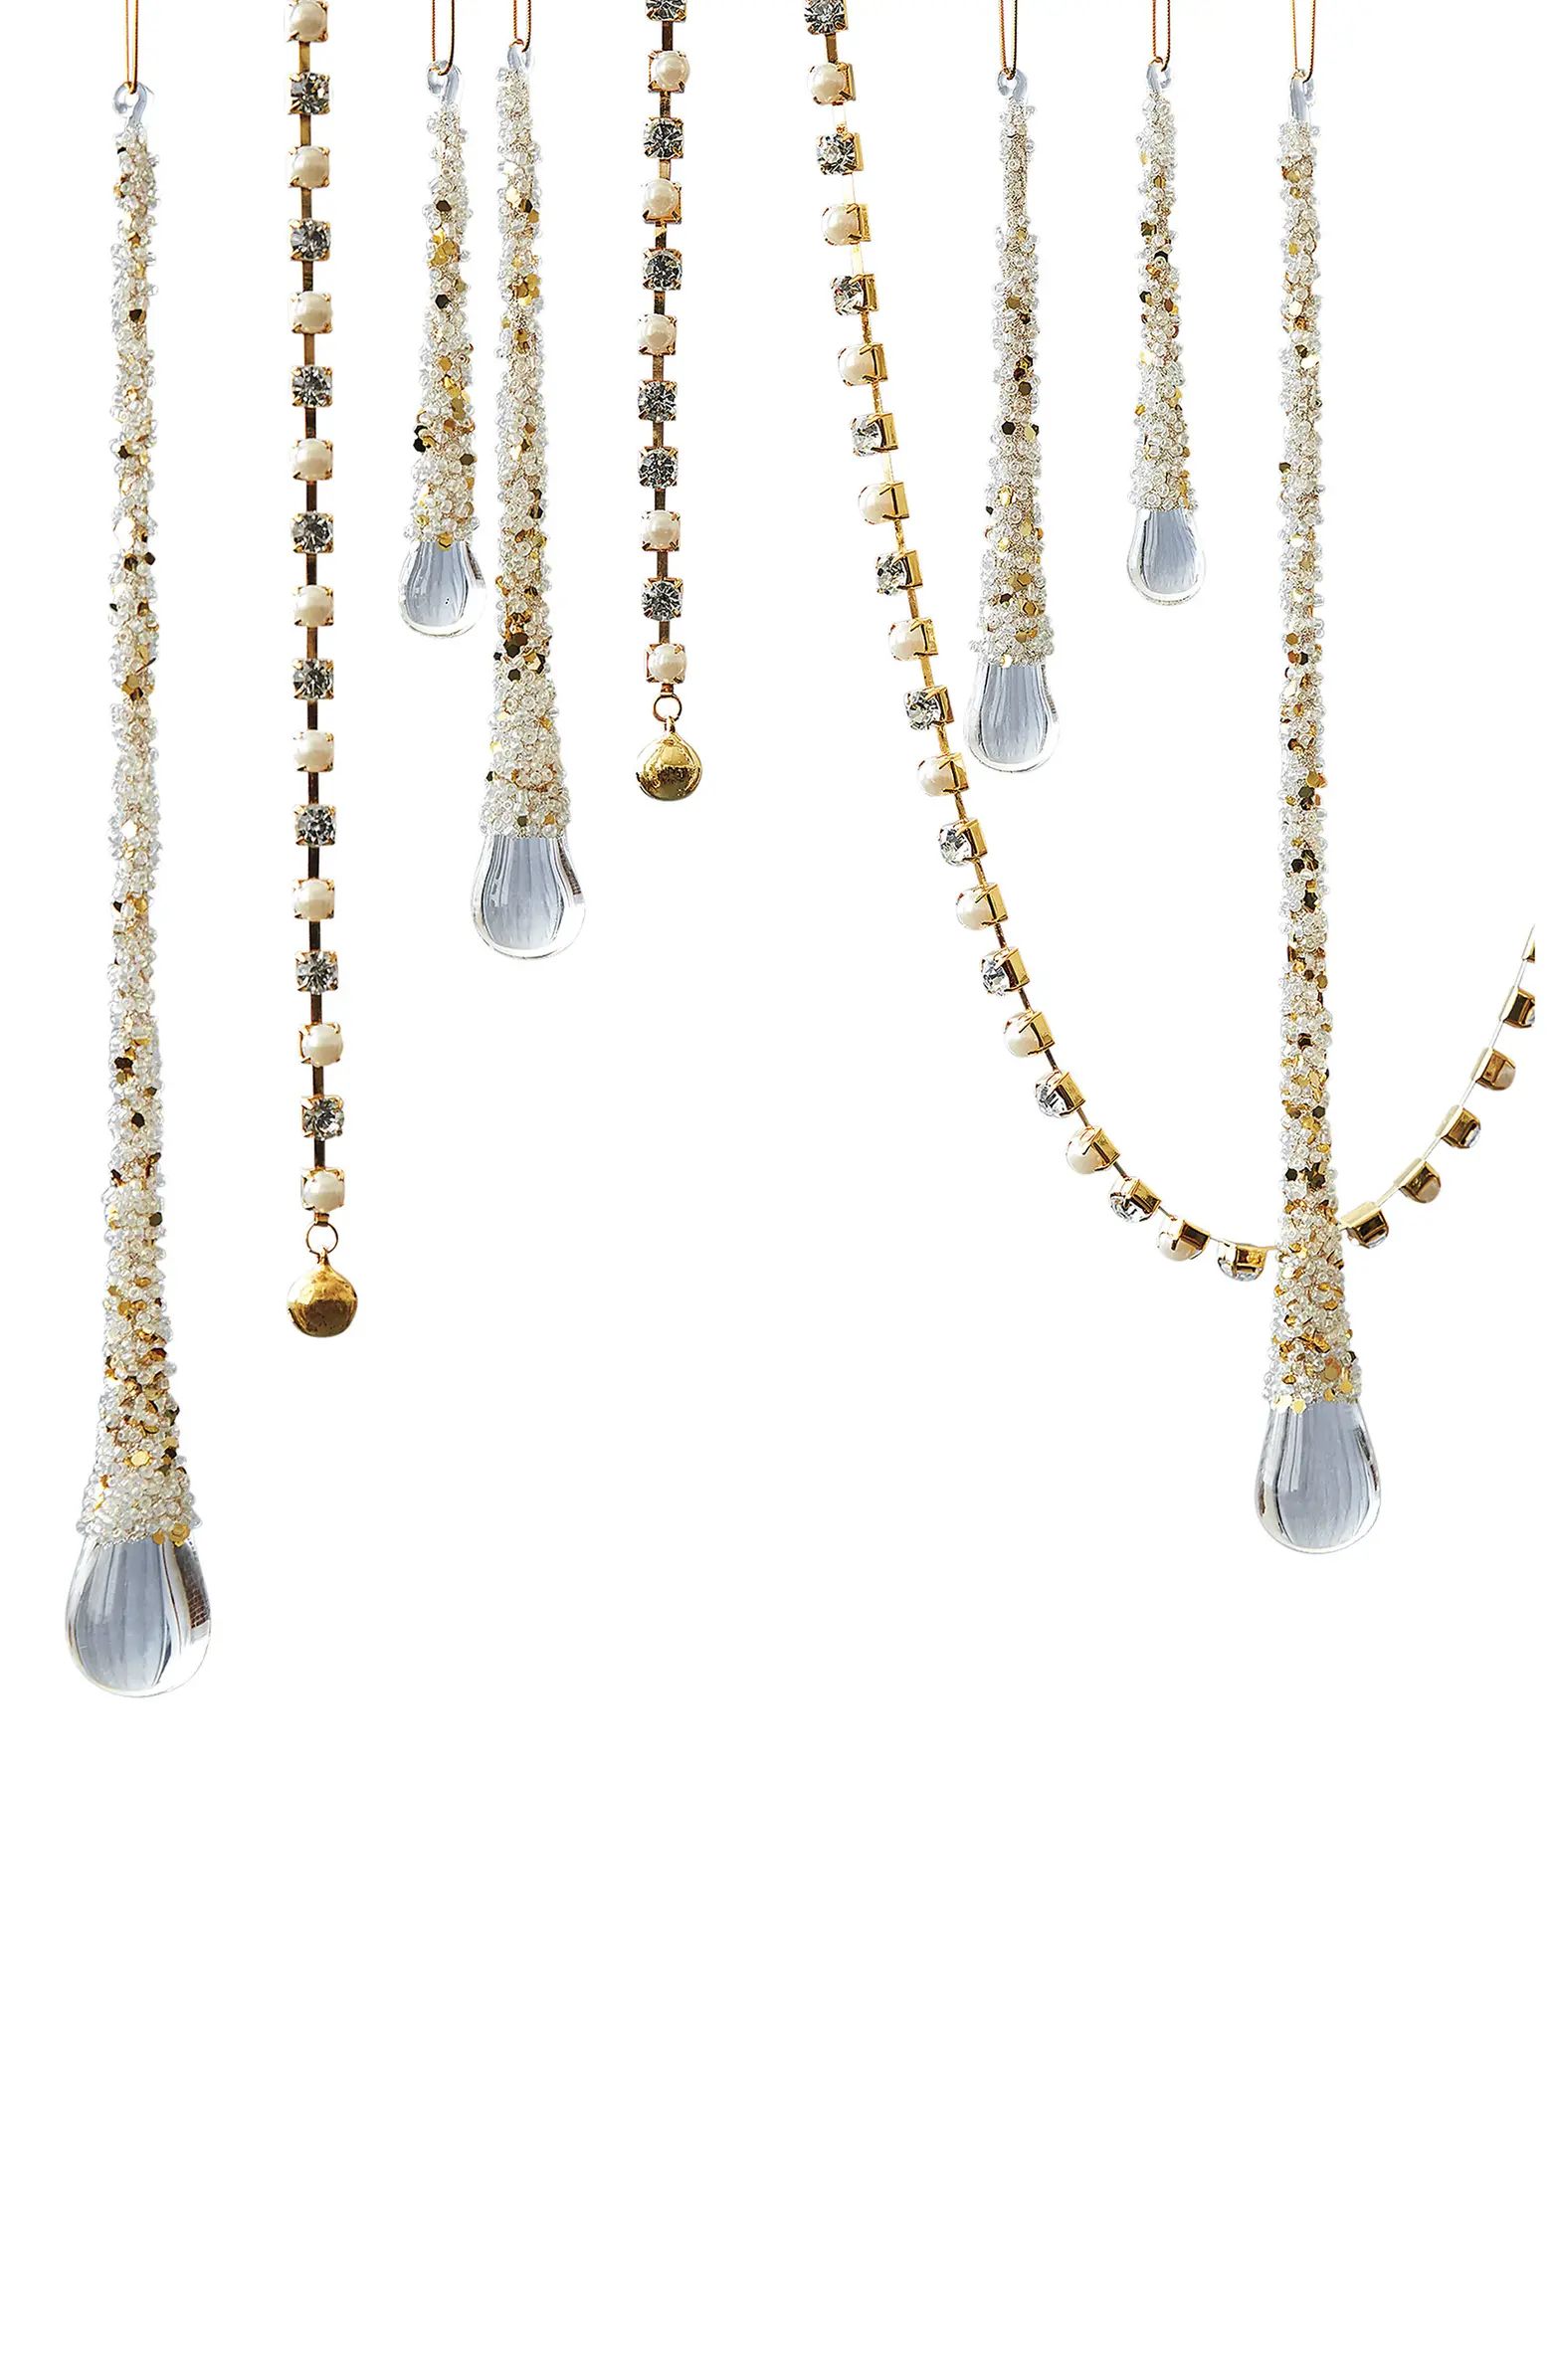 Balsam Hill Icy Teardrops Set of 6 Ornaments | Nordstrom | Nordstrom